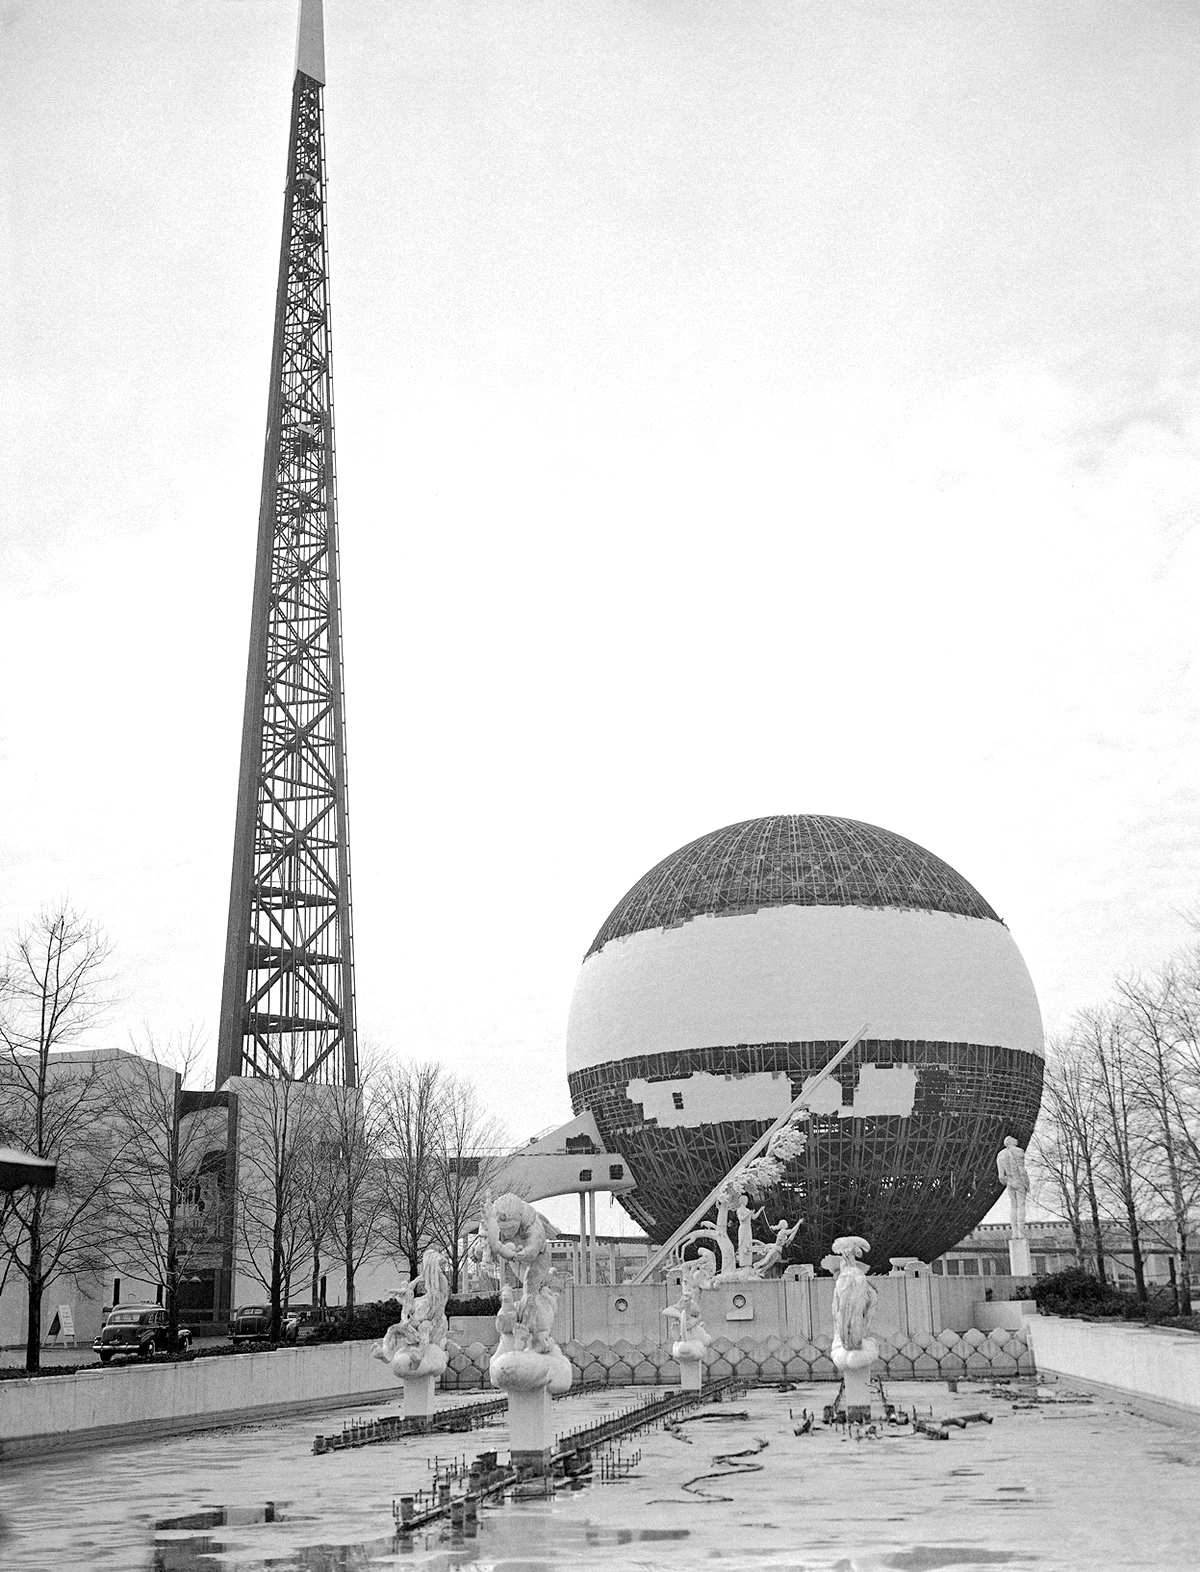 The second and last season of this edition of the New York World's Fair closed on October 27, 1940.